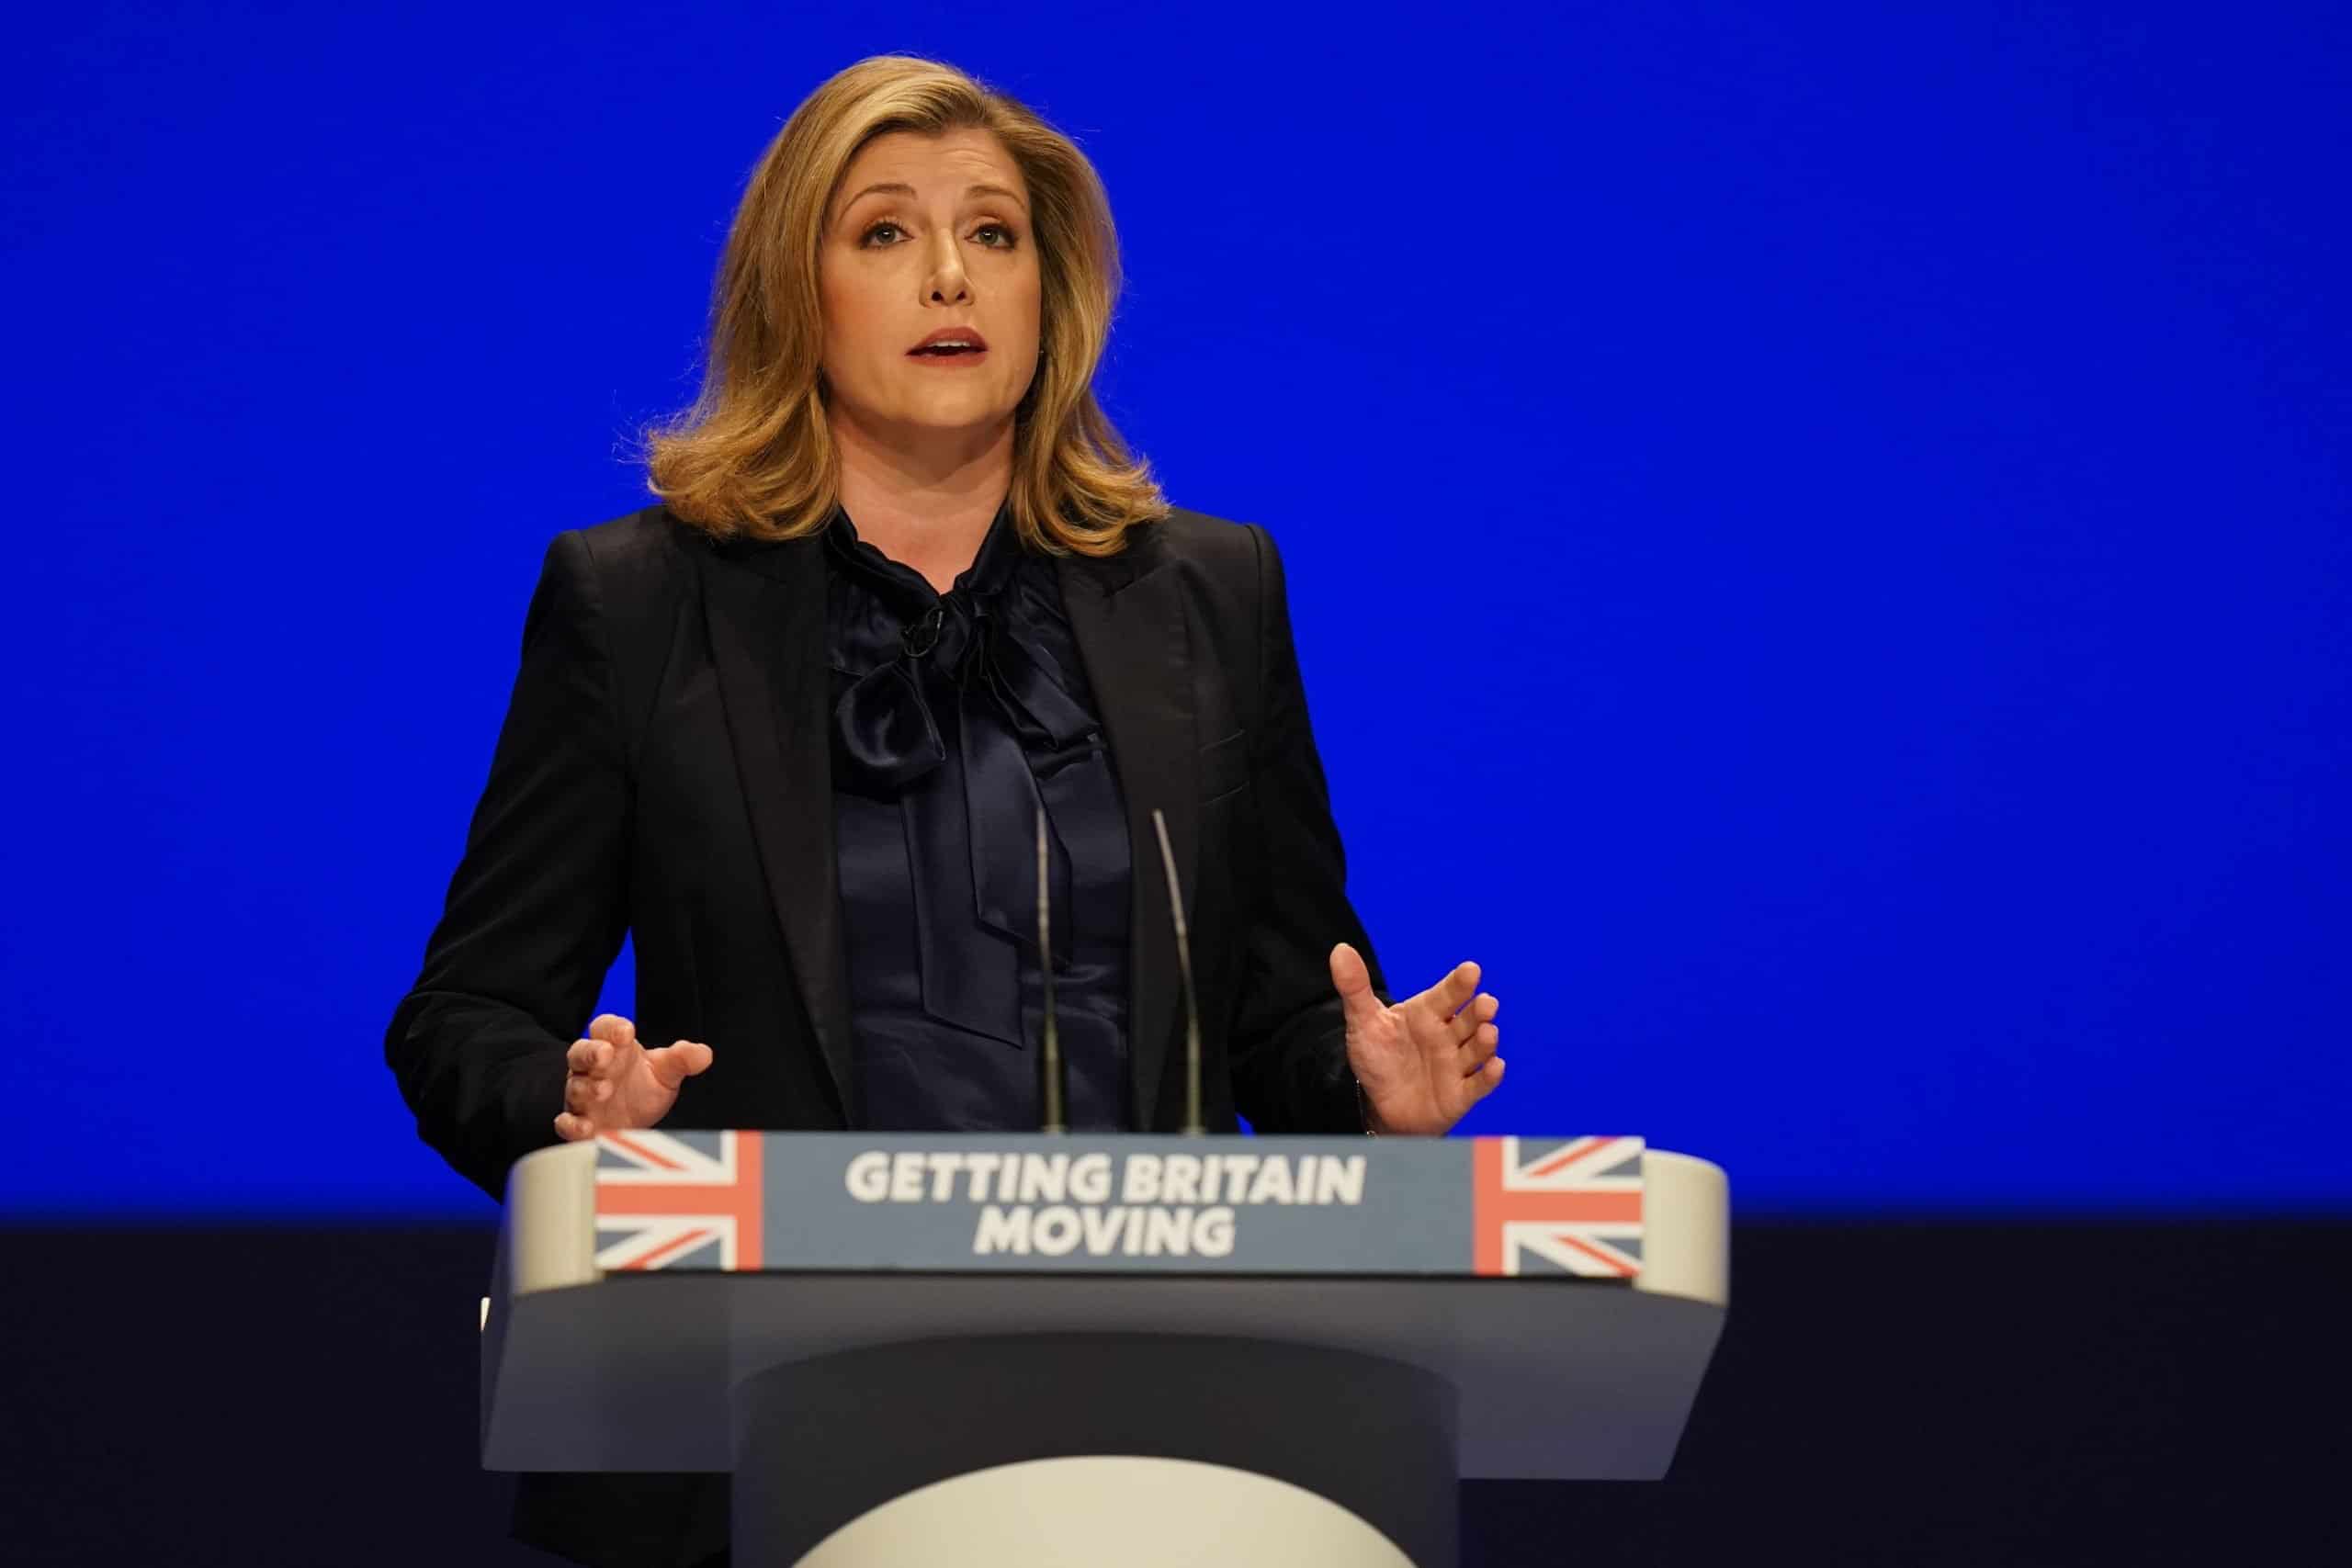 Penny Mordaunt ridiculed for backing new ‘National Service’ plans